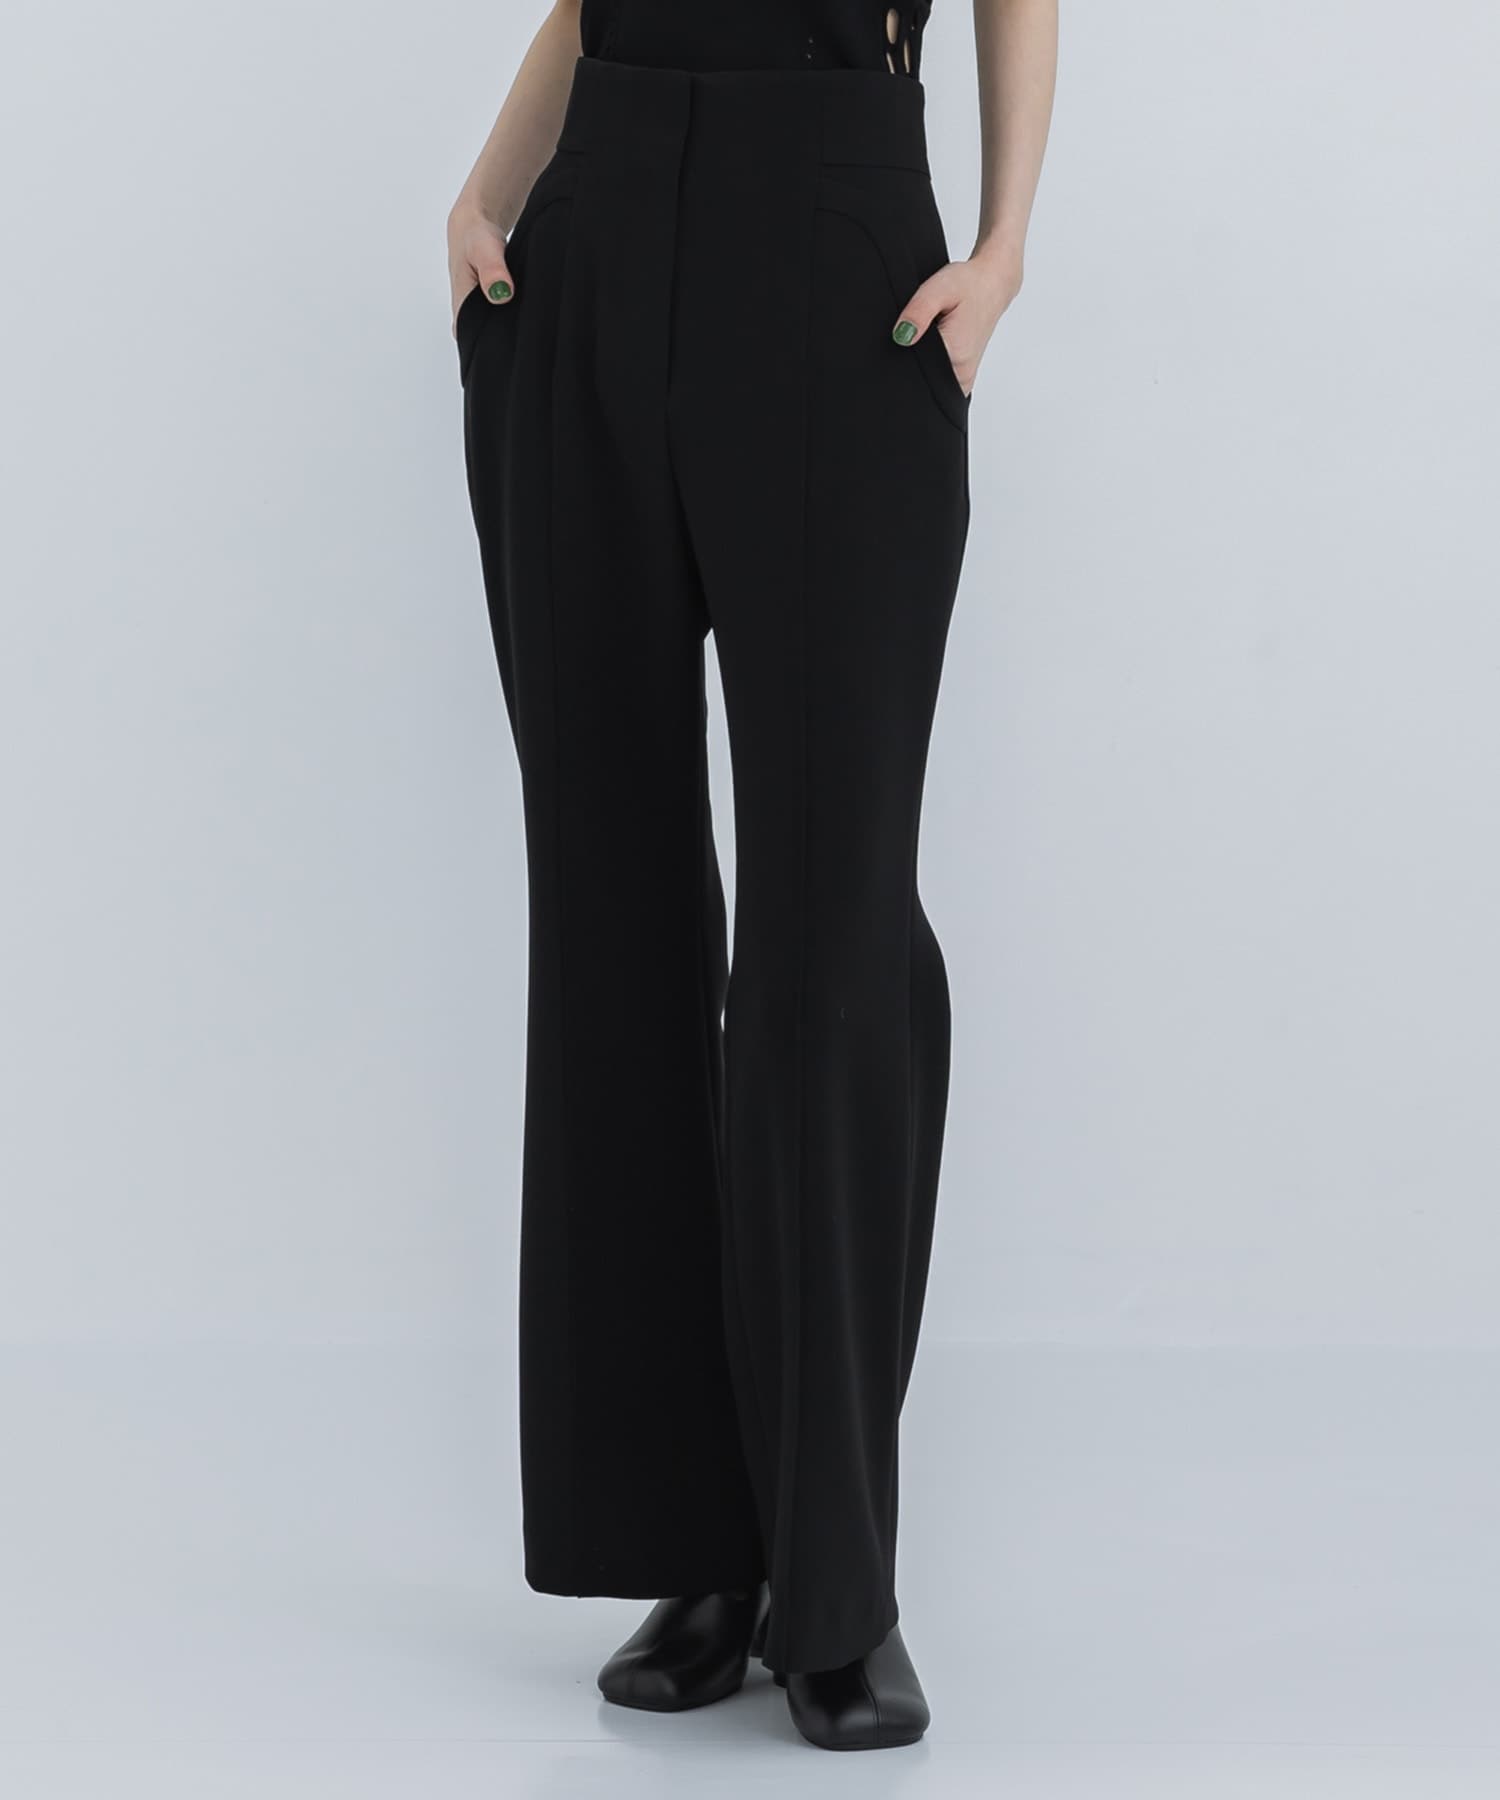 Triacetate Polyester Flared Trousers